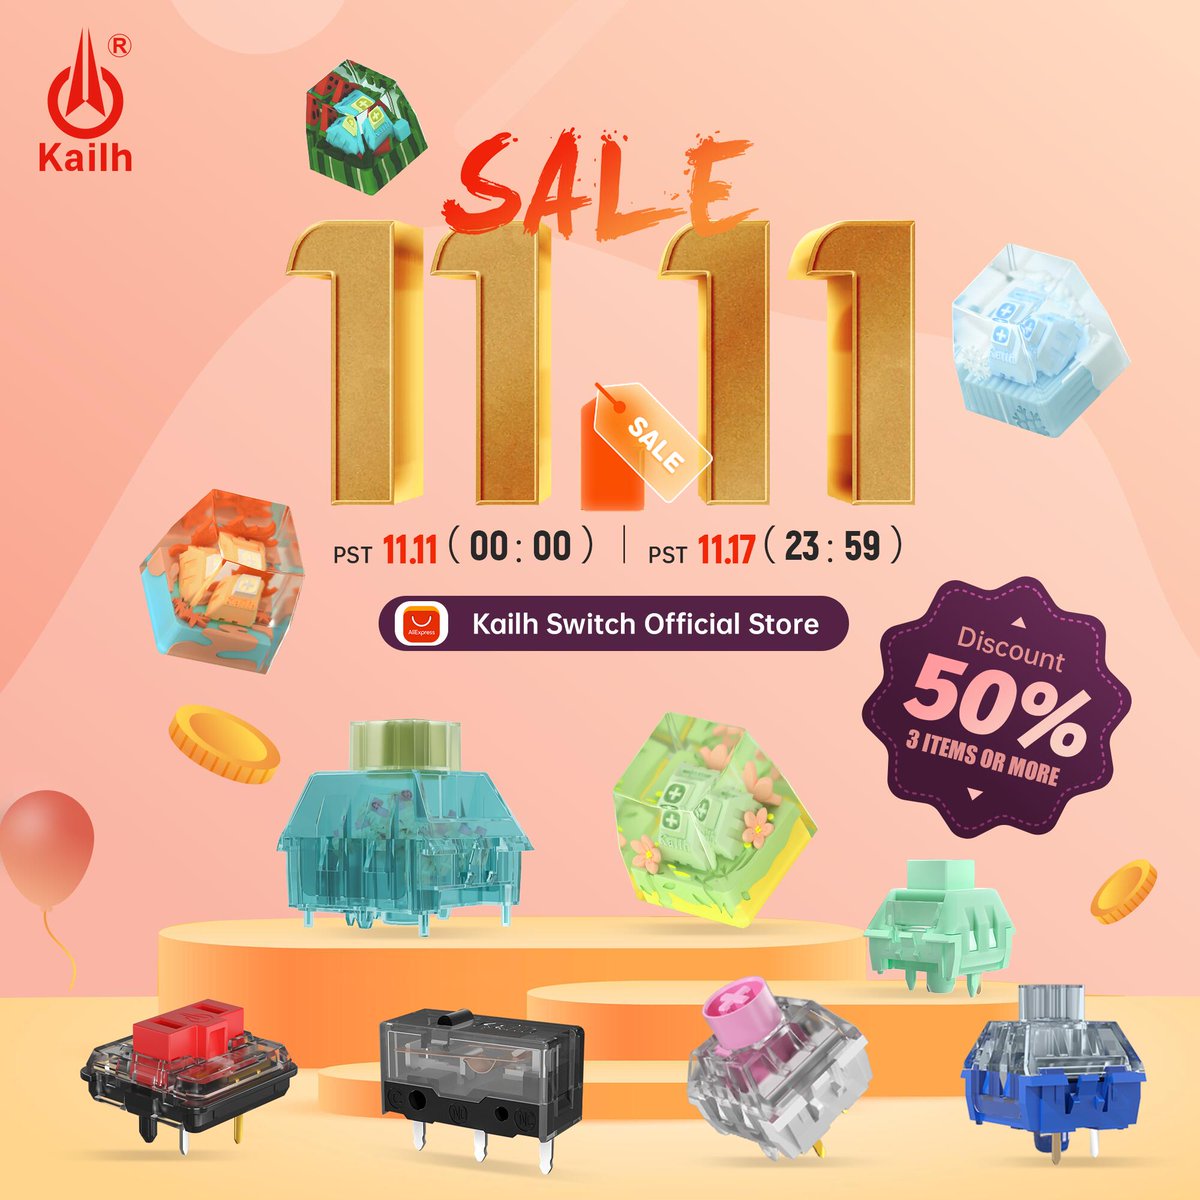 11.11 SALES🎉🛒🛒💰
.
TIME: PST. 11.11. 00:00 -  PST 11.17 23:59
.
DISCOUNT: 50%off ( 3 Iterms or more)
.
Kailh Switch official Store, Link in the bio.
.
.
.
#keycaps #summer #spring #Kailh #Winter #autumn #sales1111 #keyboardswitches #hotsales📷 #sales11nov #switches